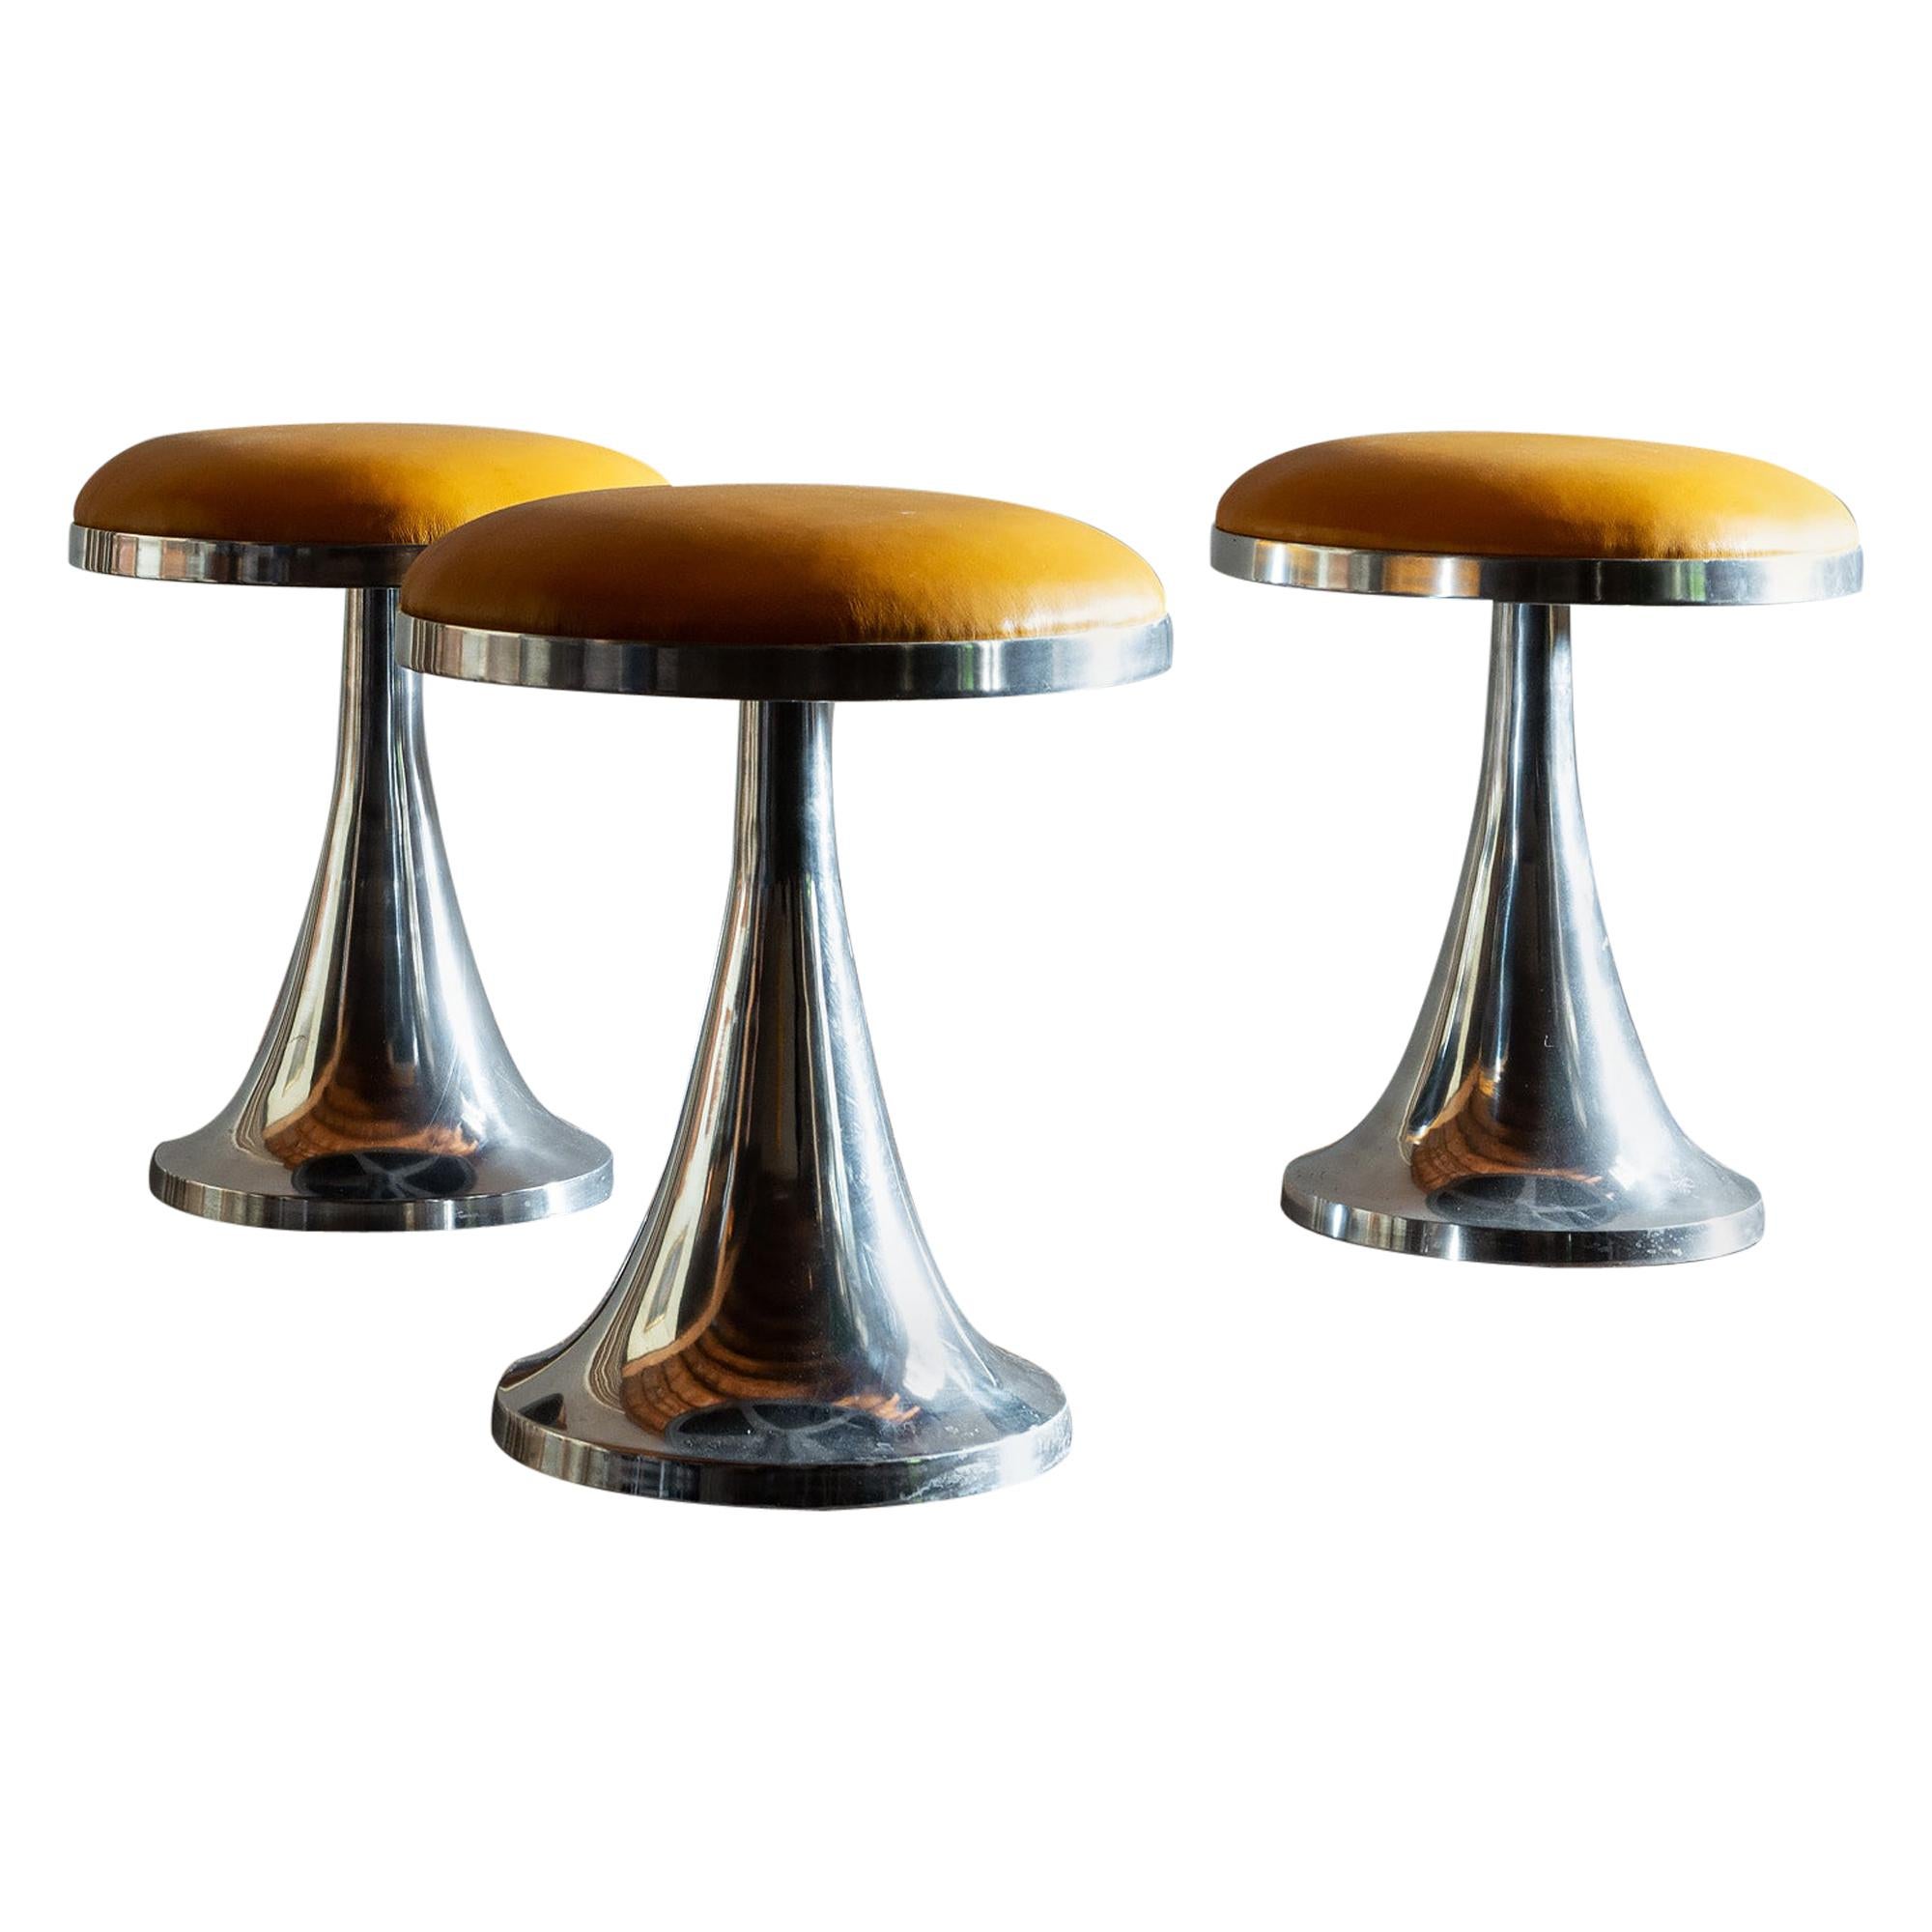 Pair of Chrome Stools with Ochre Leather Seats, 1970s